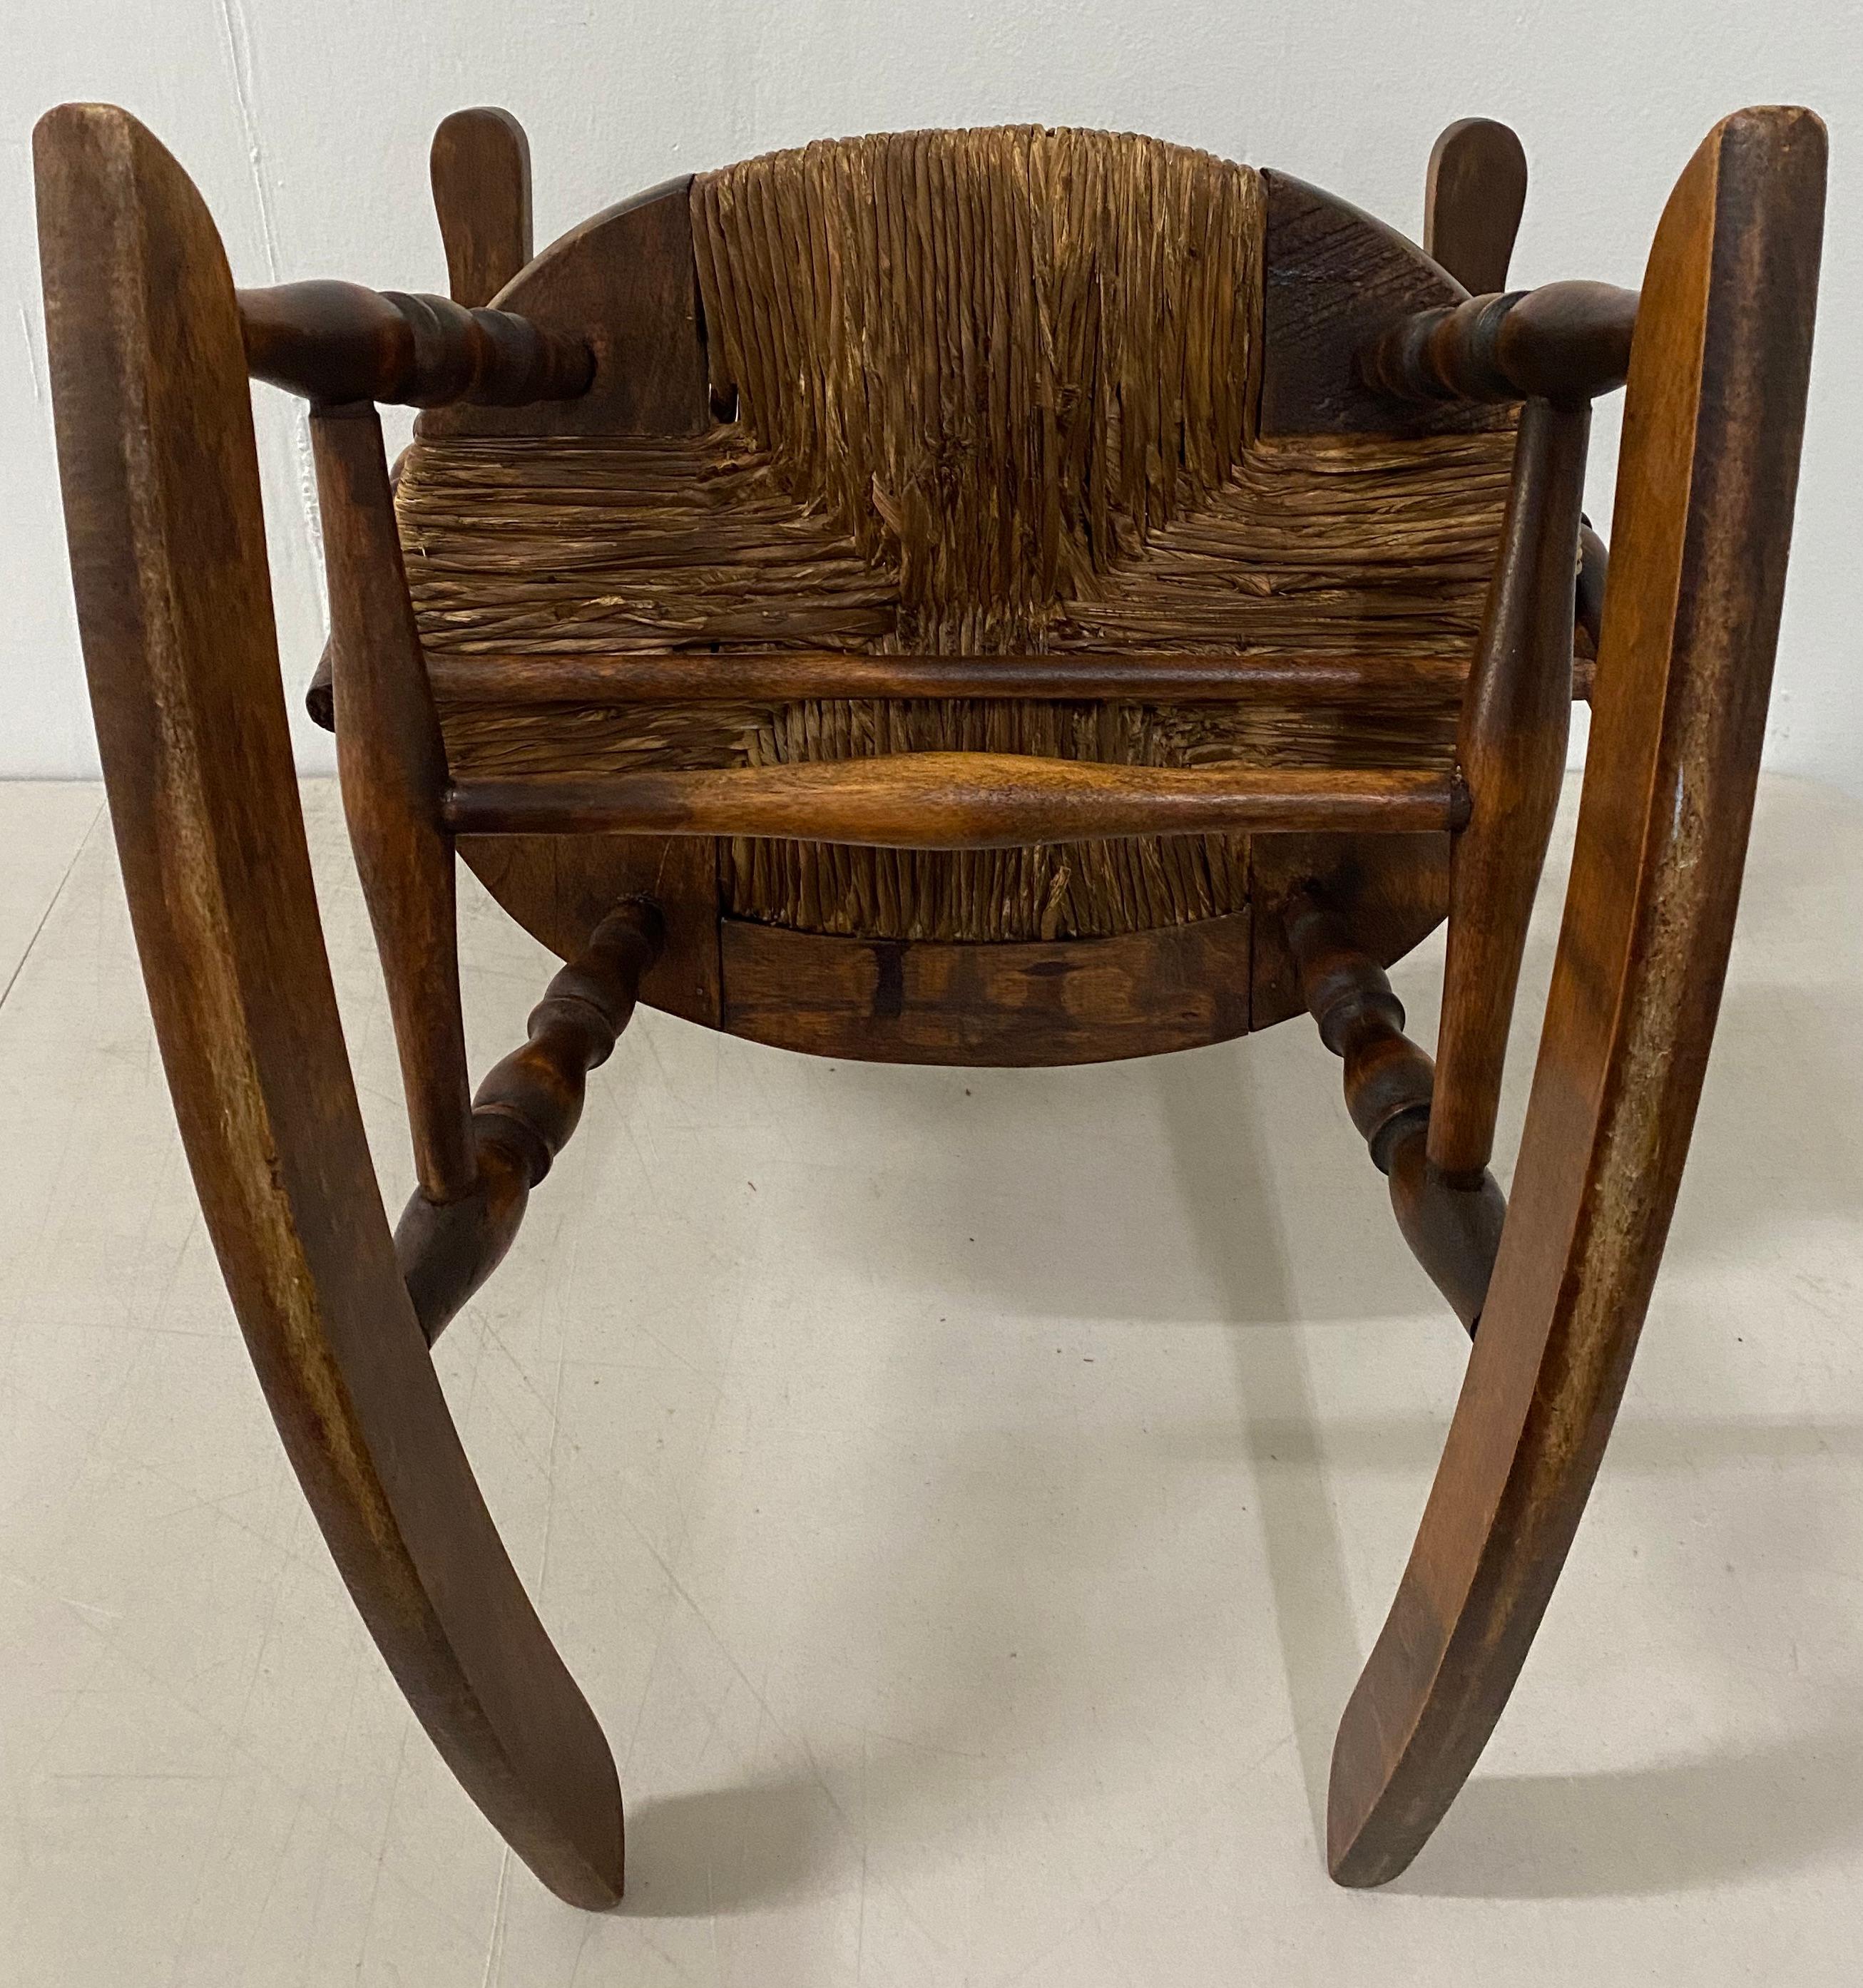 Hand-Crafted Late 19th Century Child's Windsor Rocking Chair